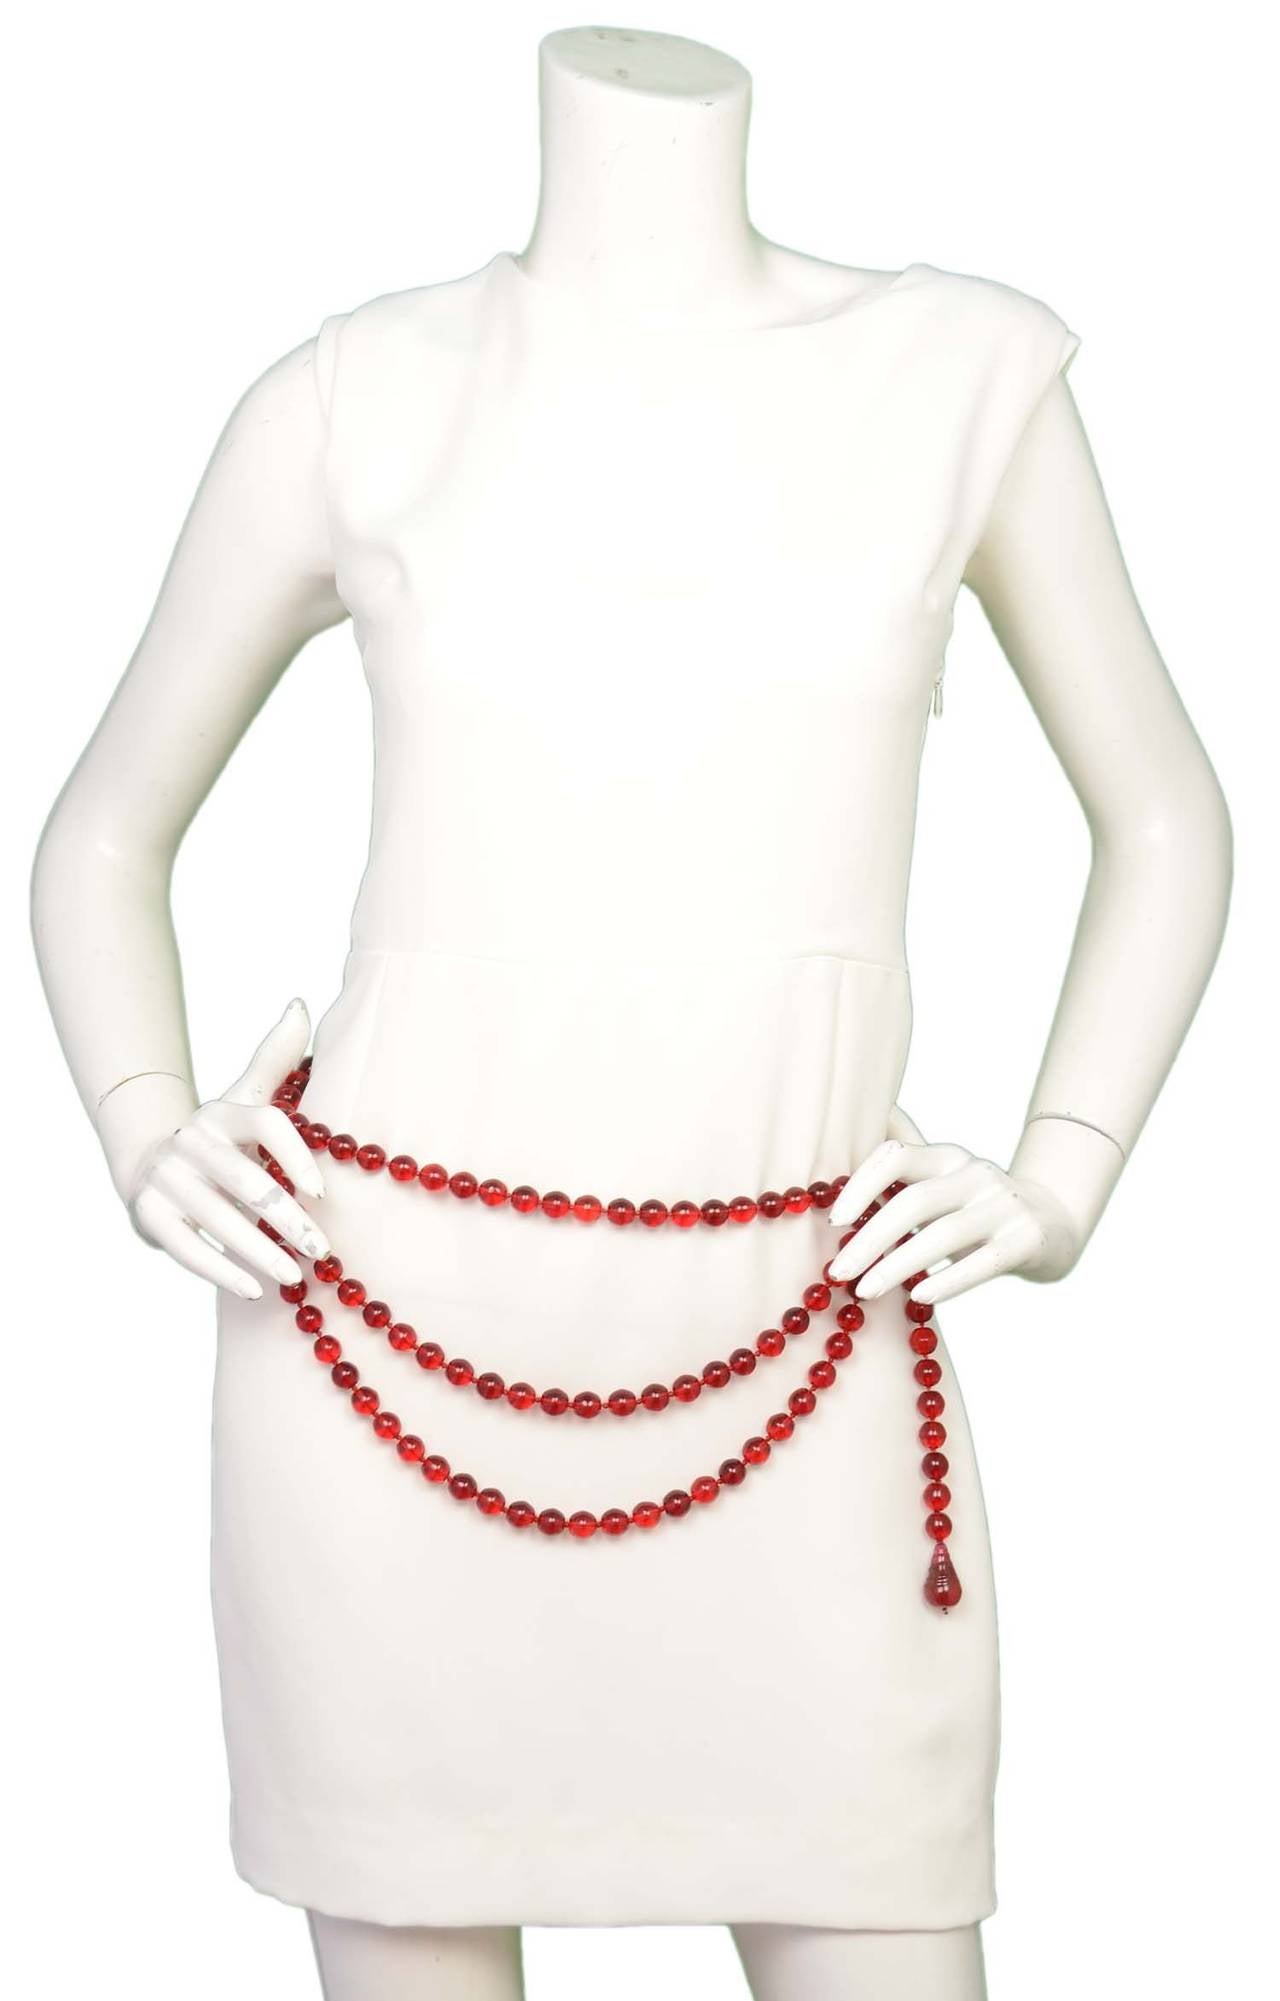 CHANEL Vintage 1989 Red Gripoix Three Tier Beaded Belt/Necklace 1